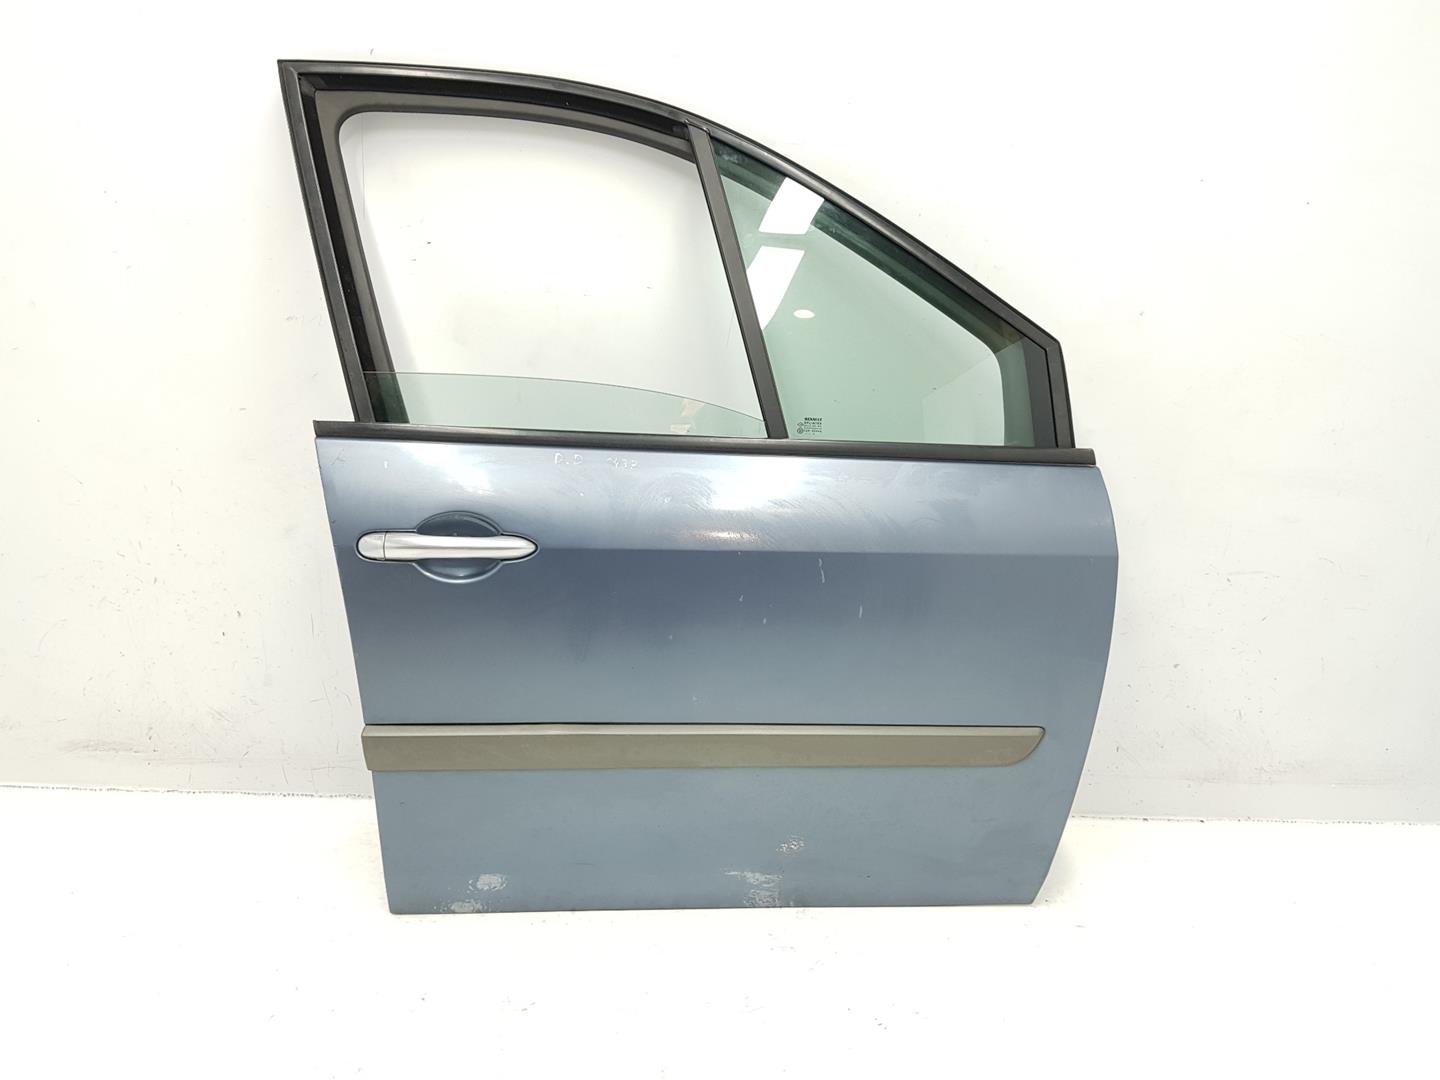 RENAULT Scenic 2 generation (2003-2010) Front Right Door 7751477220, COLORGRISOSCUROTEJ47 21574082